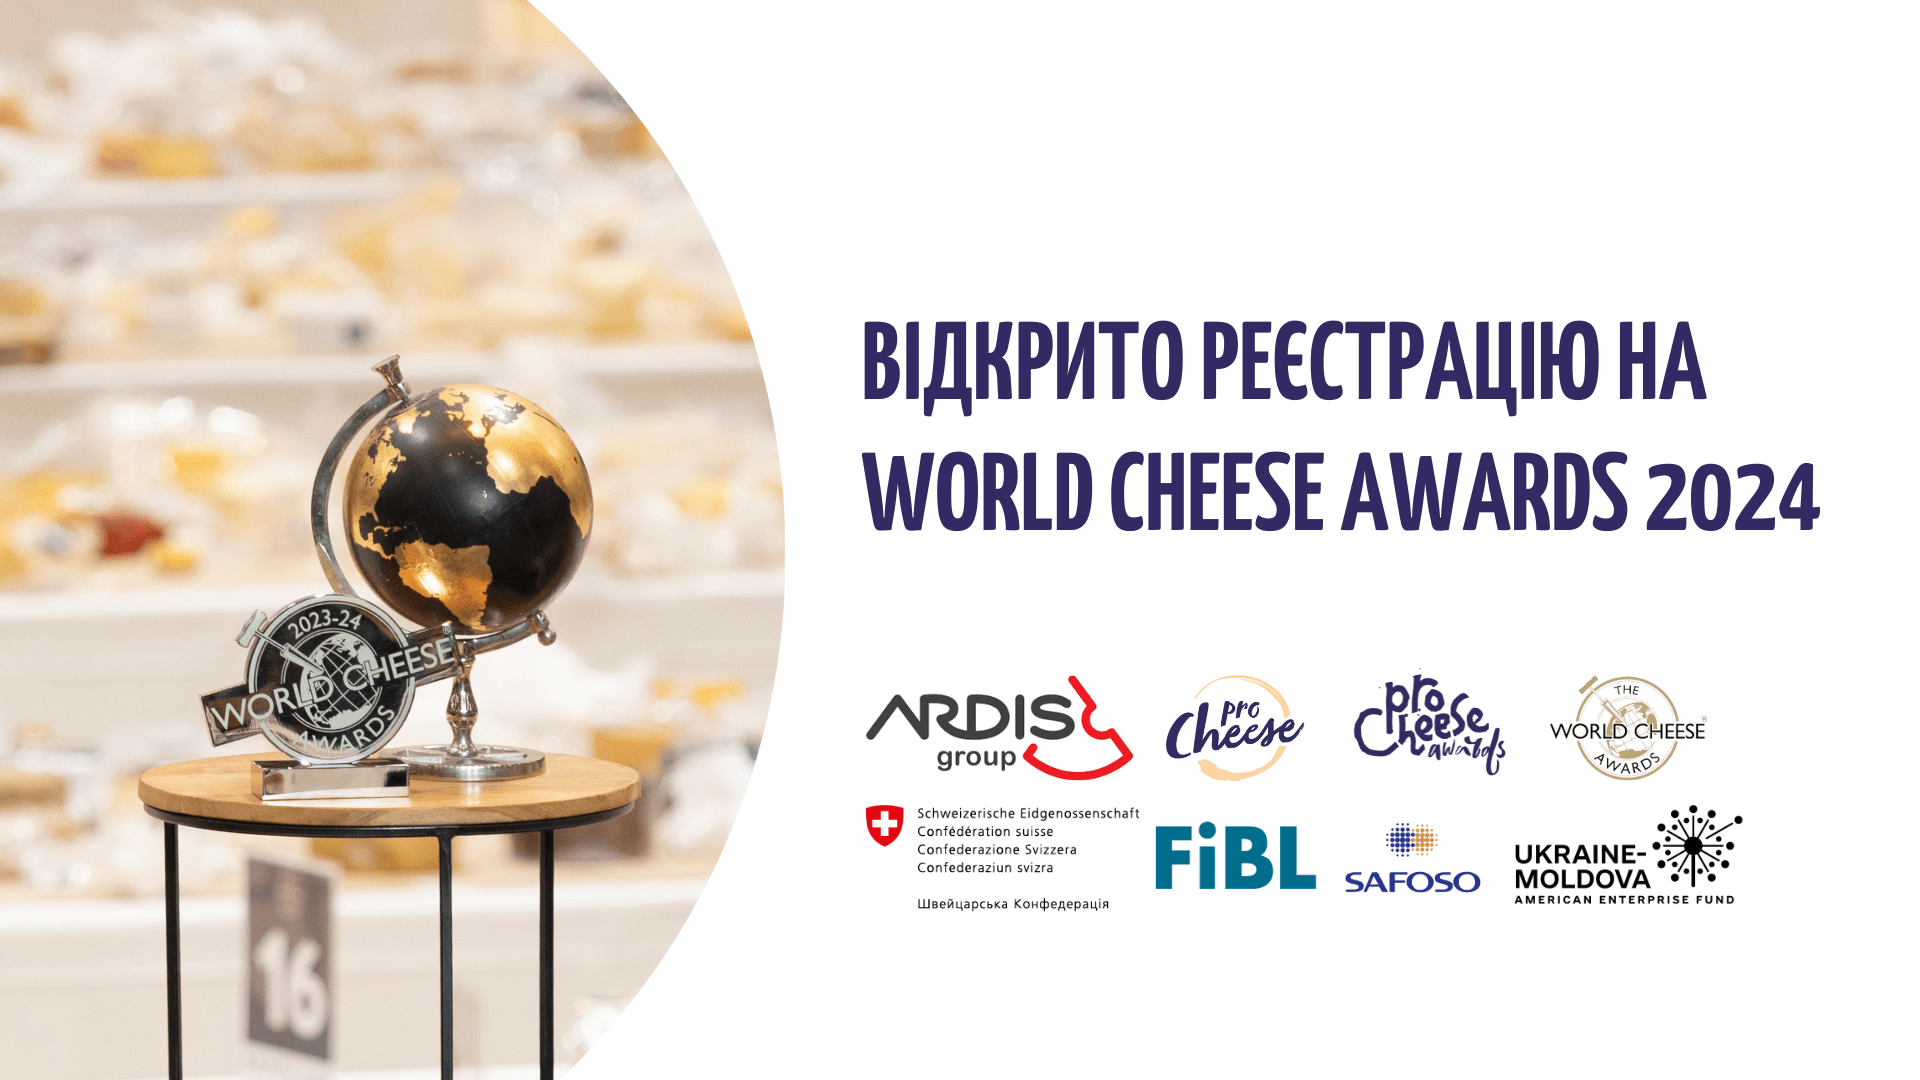 World Cheese Awards 2024: Call for Applications picture